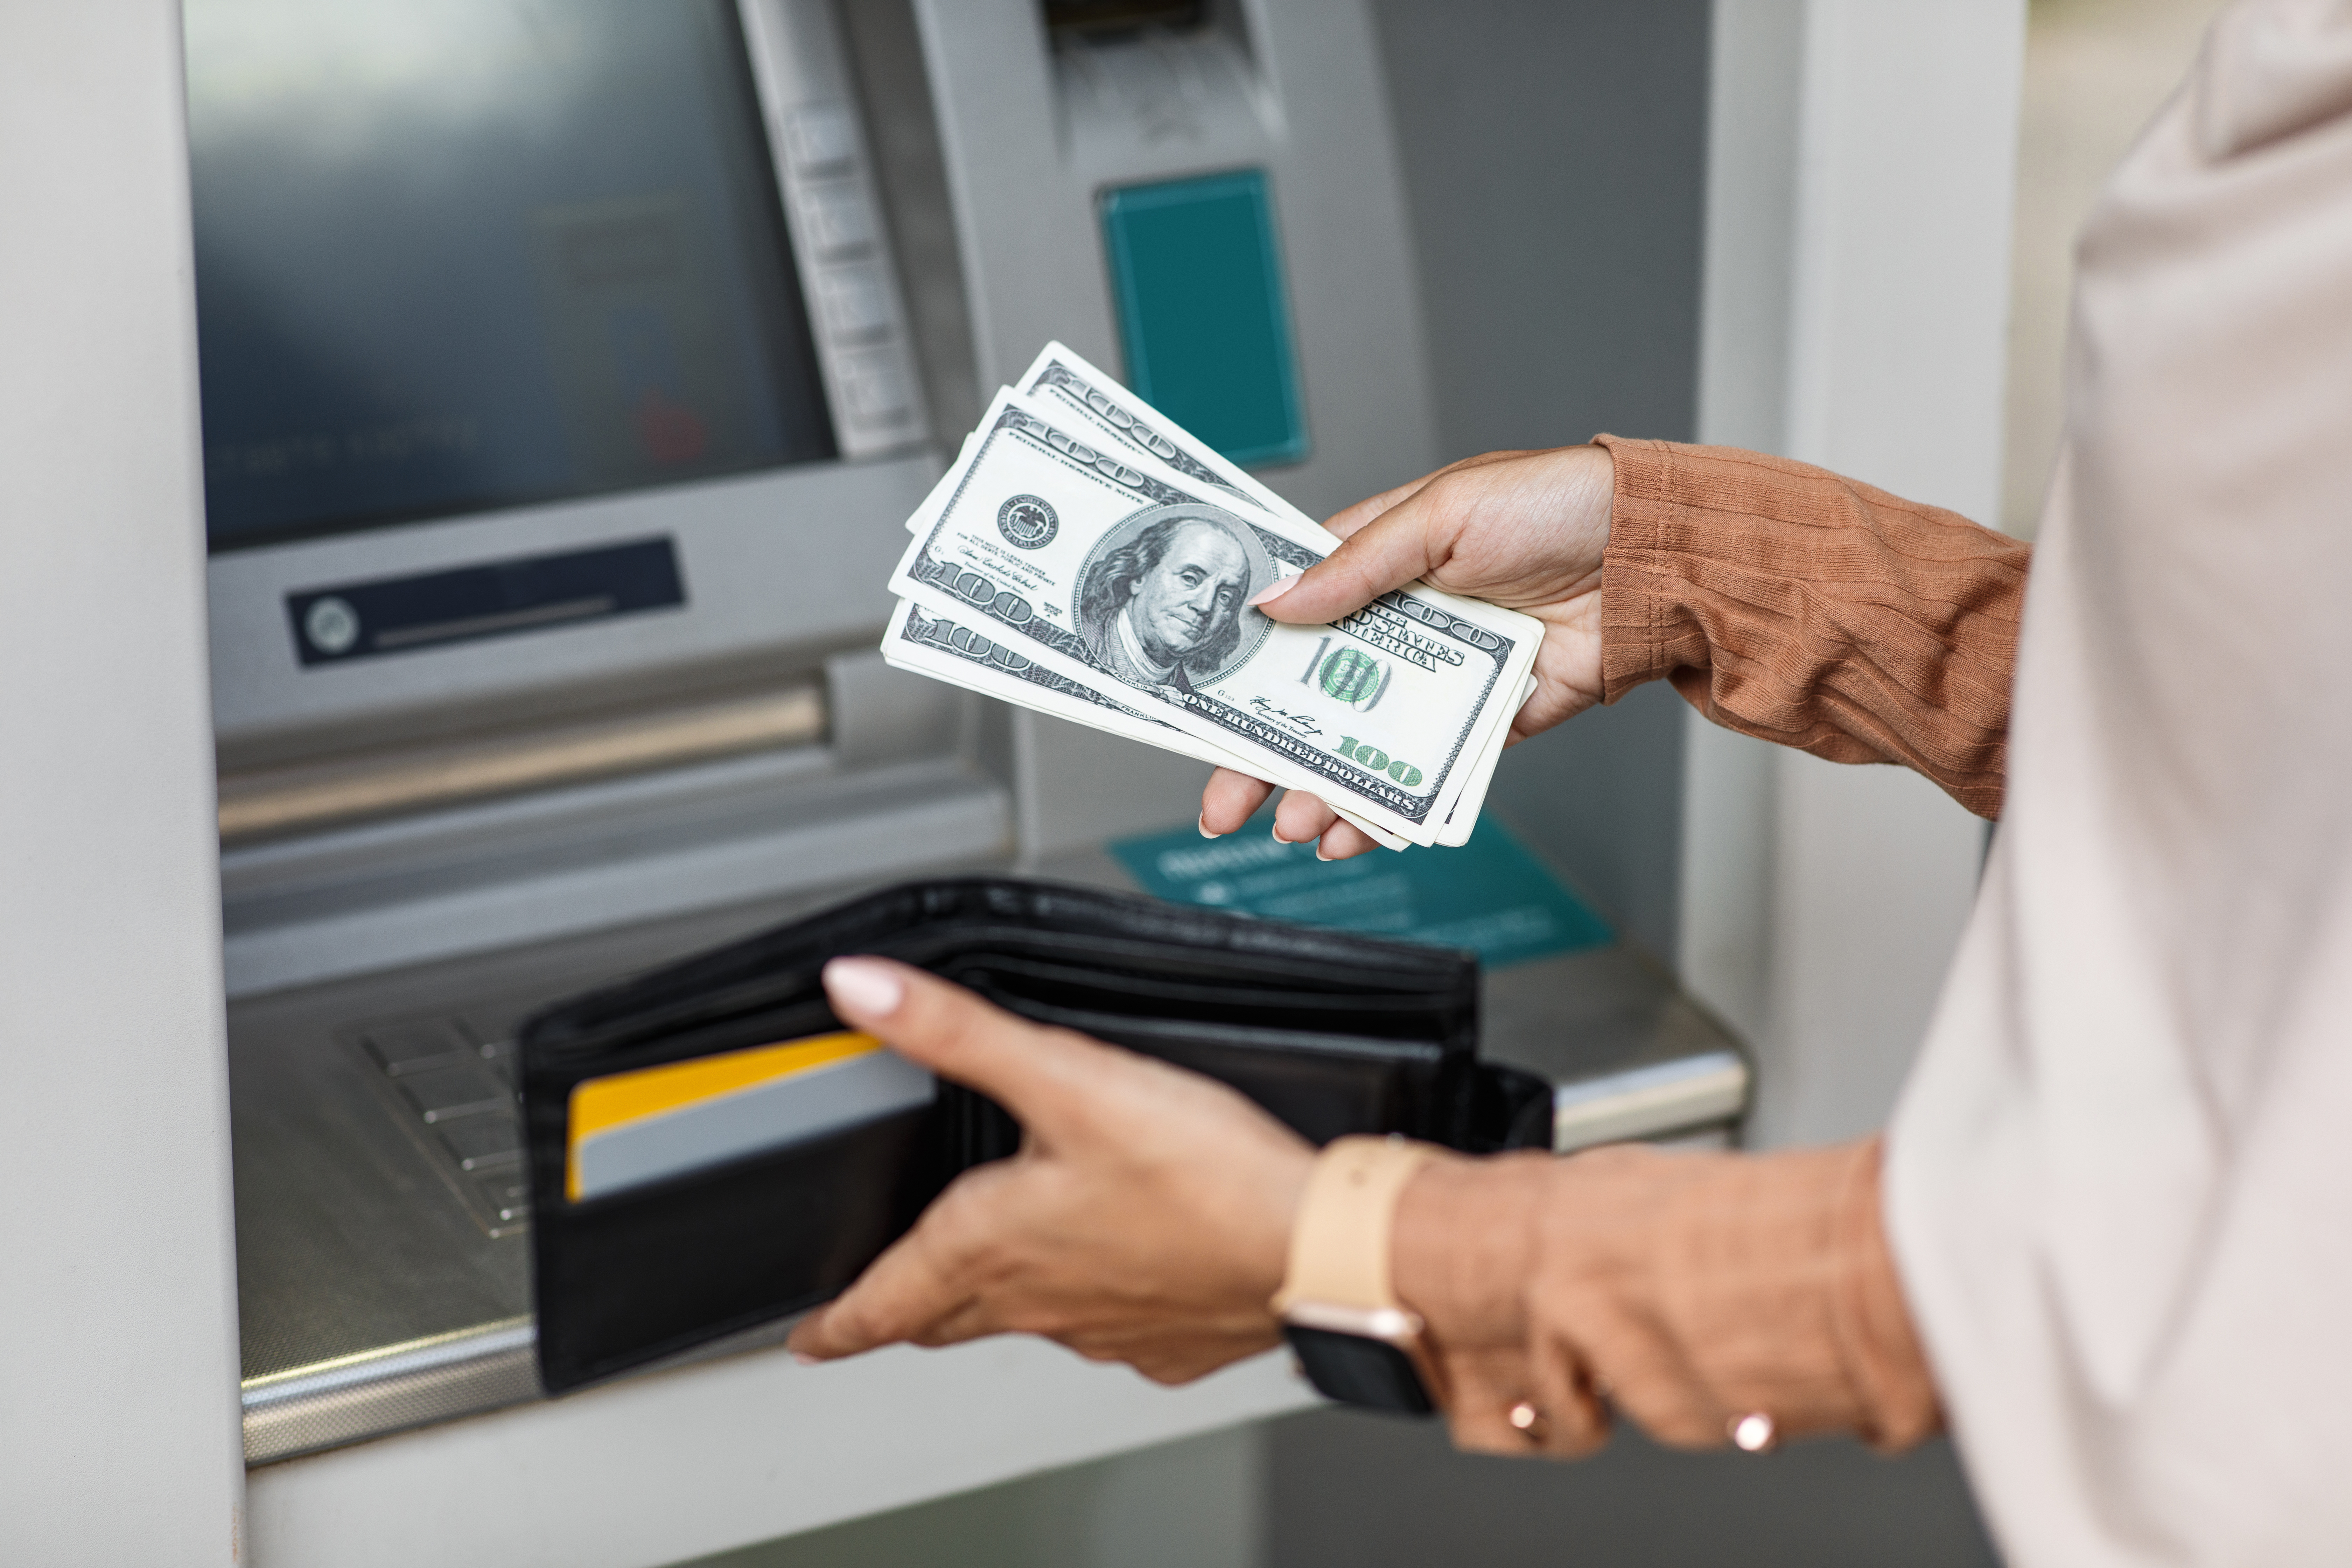 How the ATM Industry Evolved - A Brief History